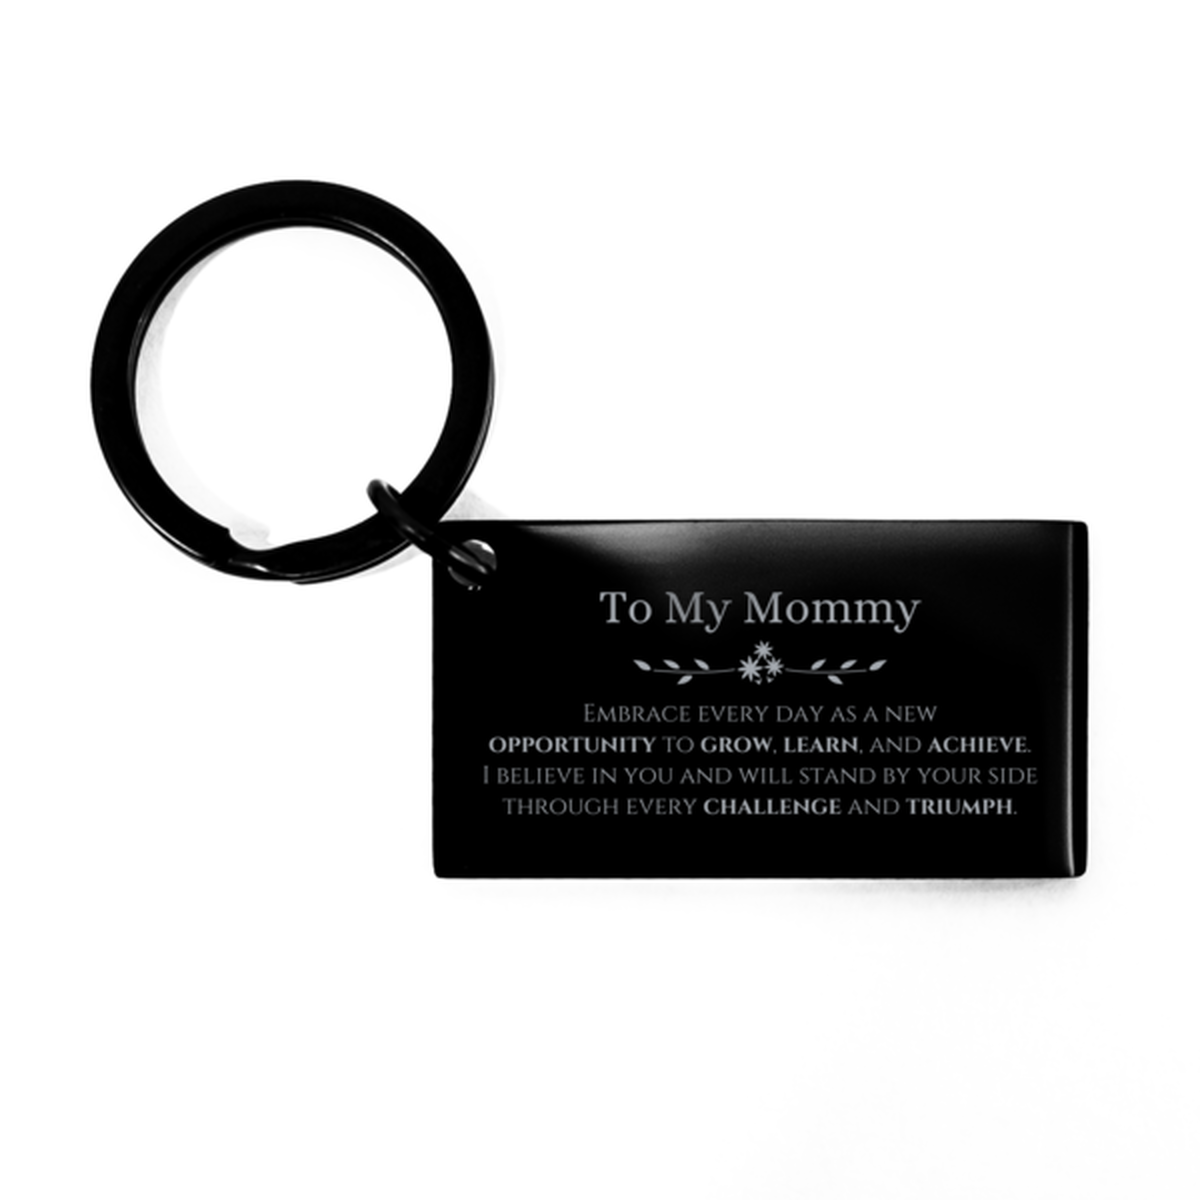 To My Mommy Gifts, I believe in you and will stand by your side, Inspirational Keychain For Mommy, Birthday Christmas Motivational Mommy Gifts